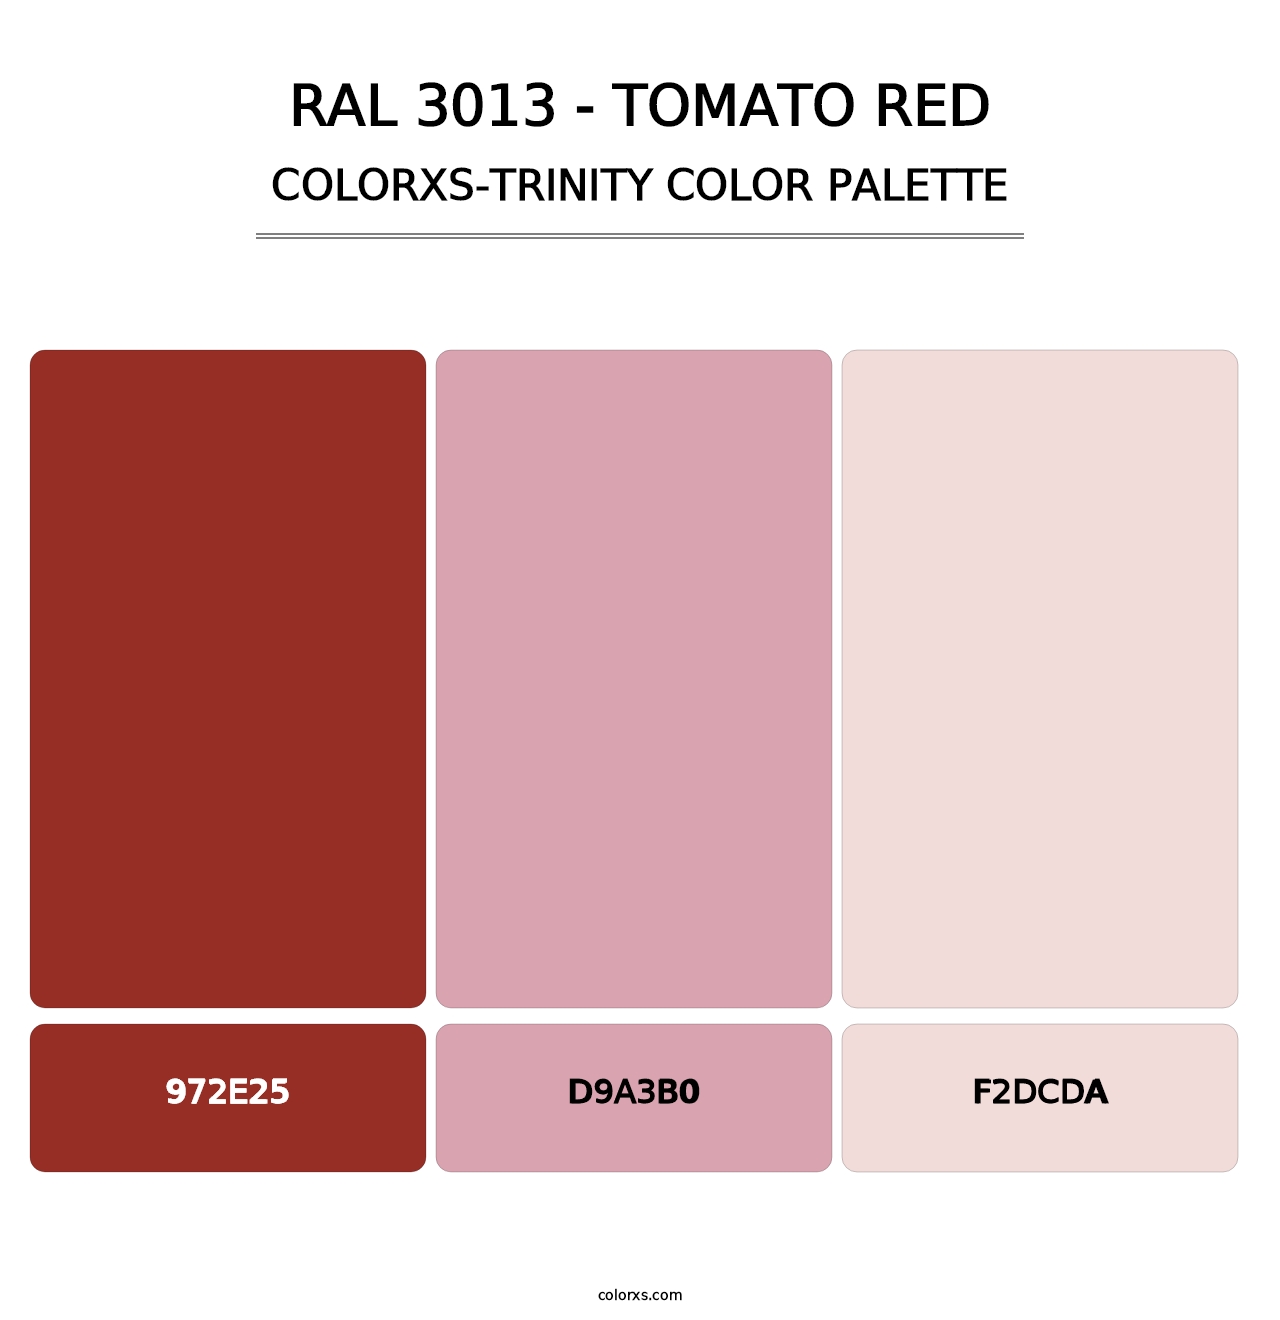 RAL 3013 - Tomato Red - Colorxs Trinity Palette